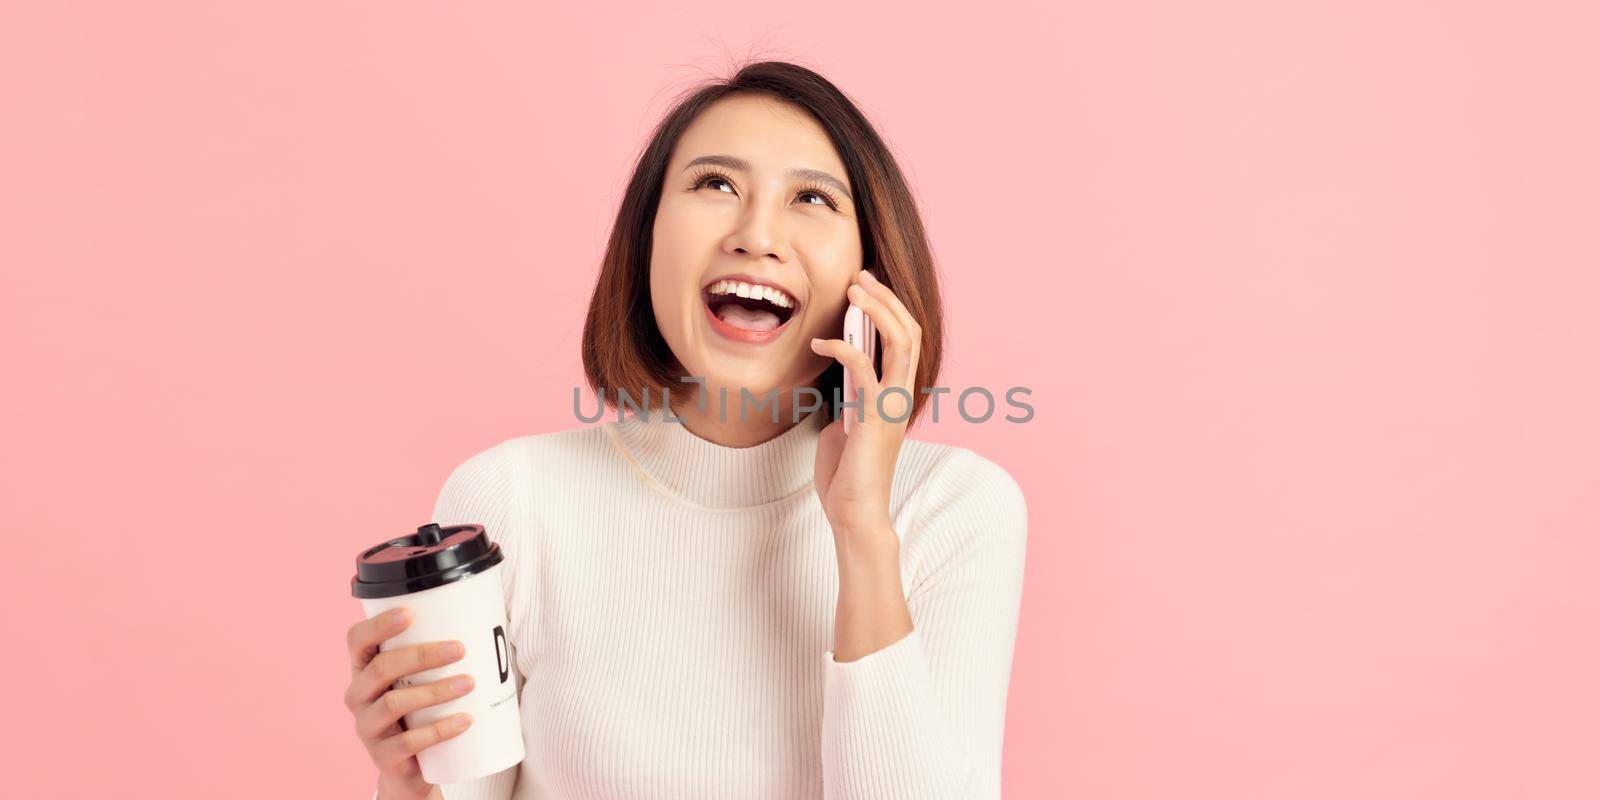 Young woman over isolated background holding coffee to take away and a mobile